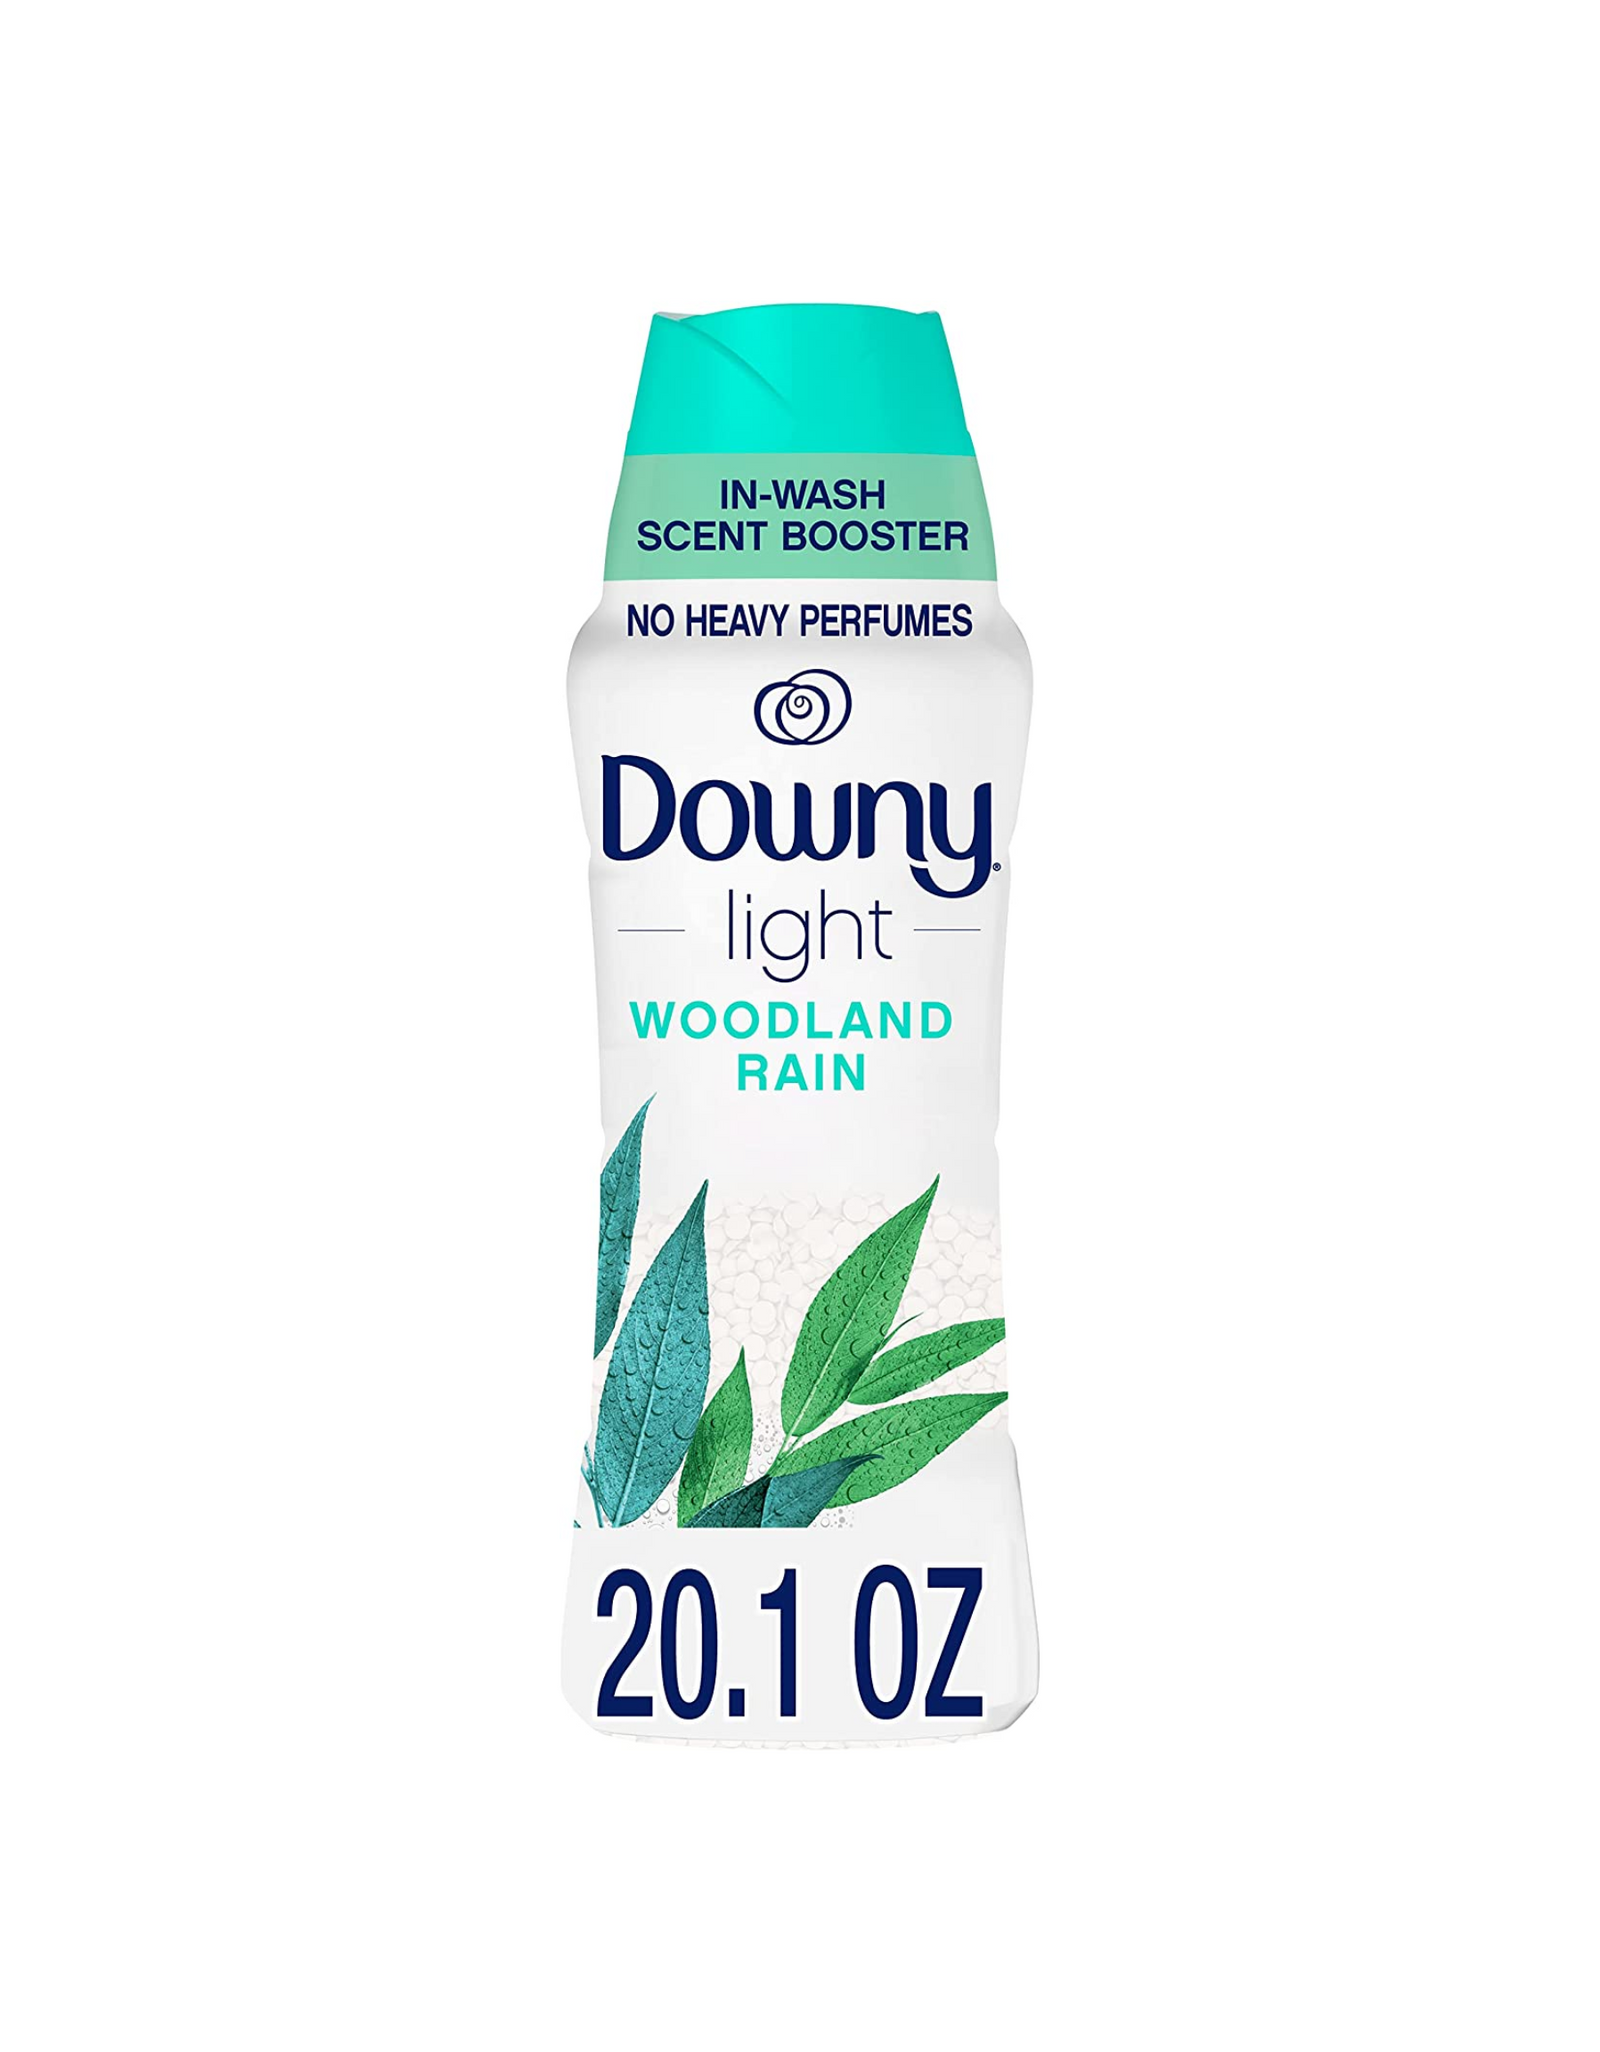 Downy Light Laundry Scent Booster Beads, Woodland Rain, 20.1 oz (Pack of 1)